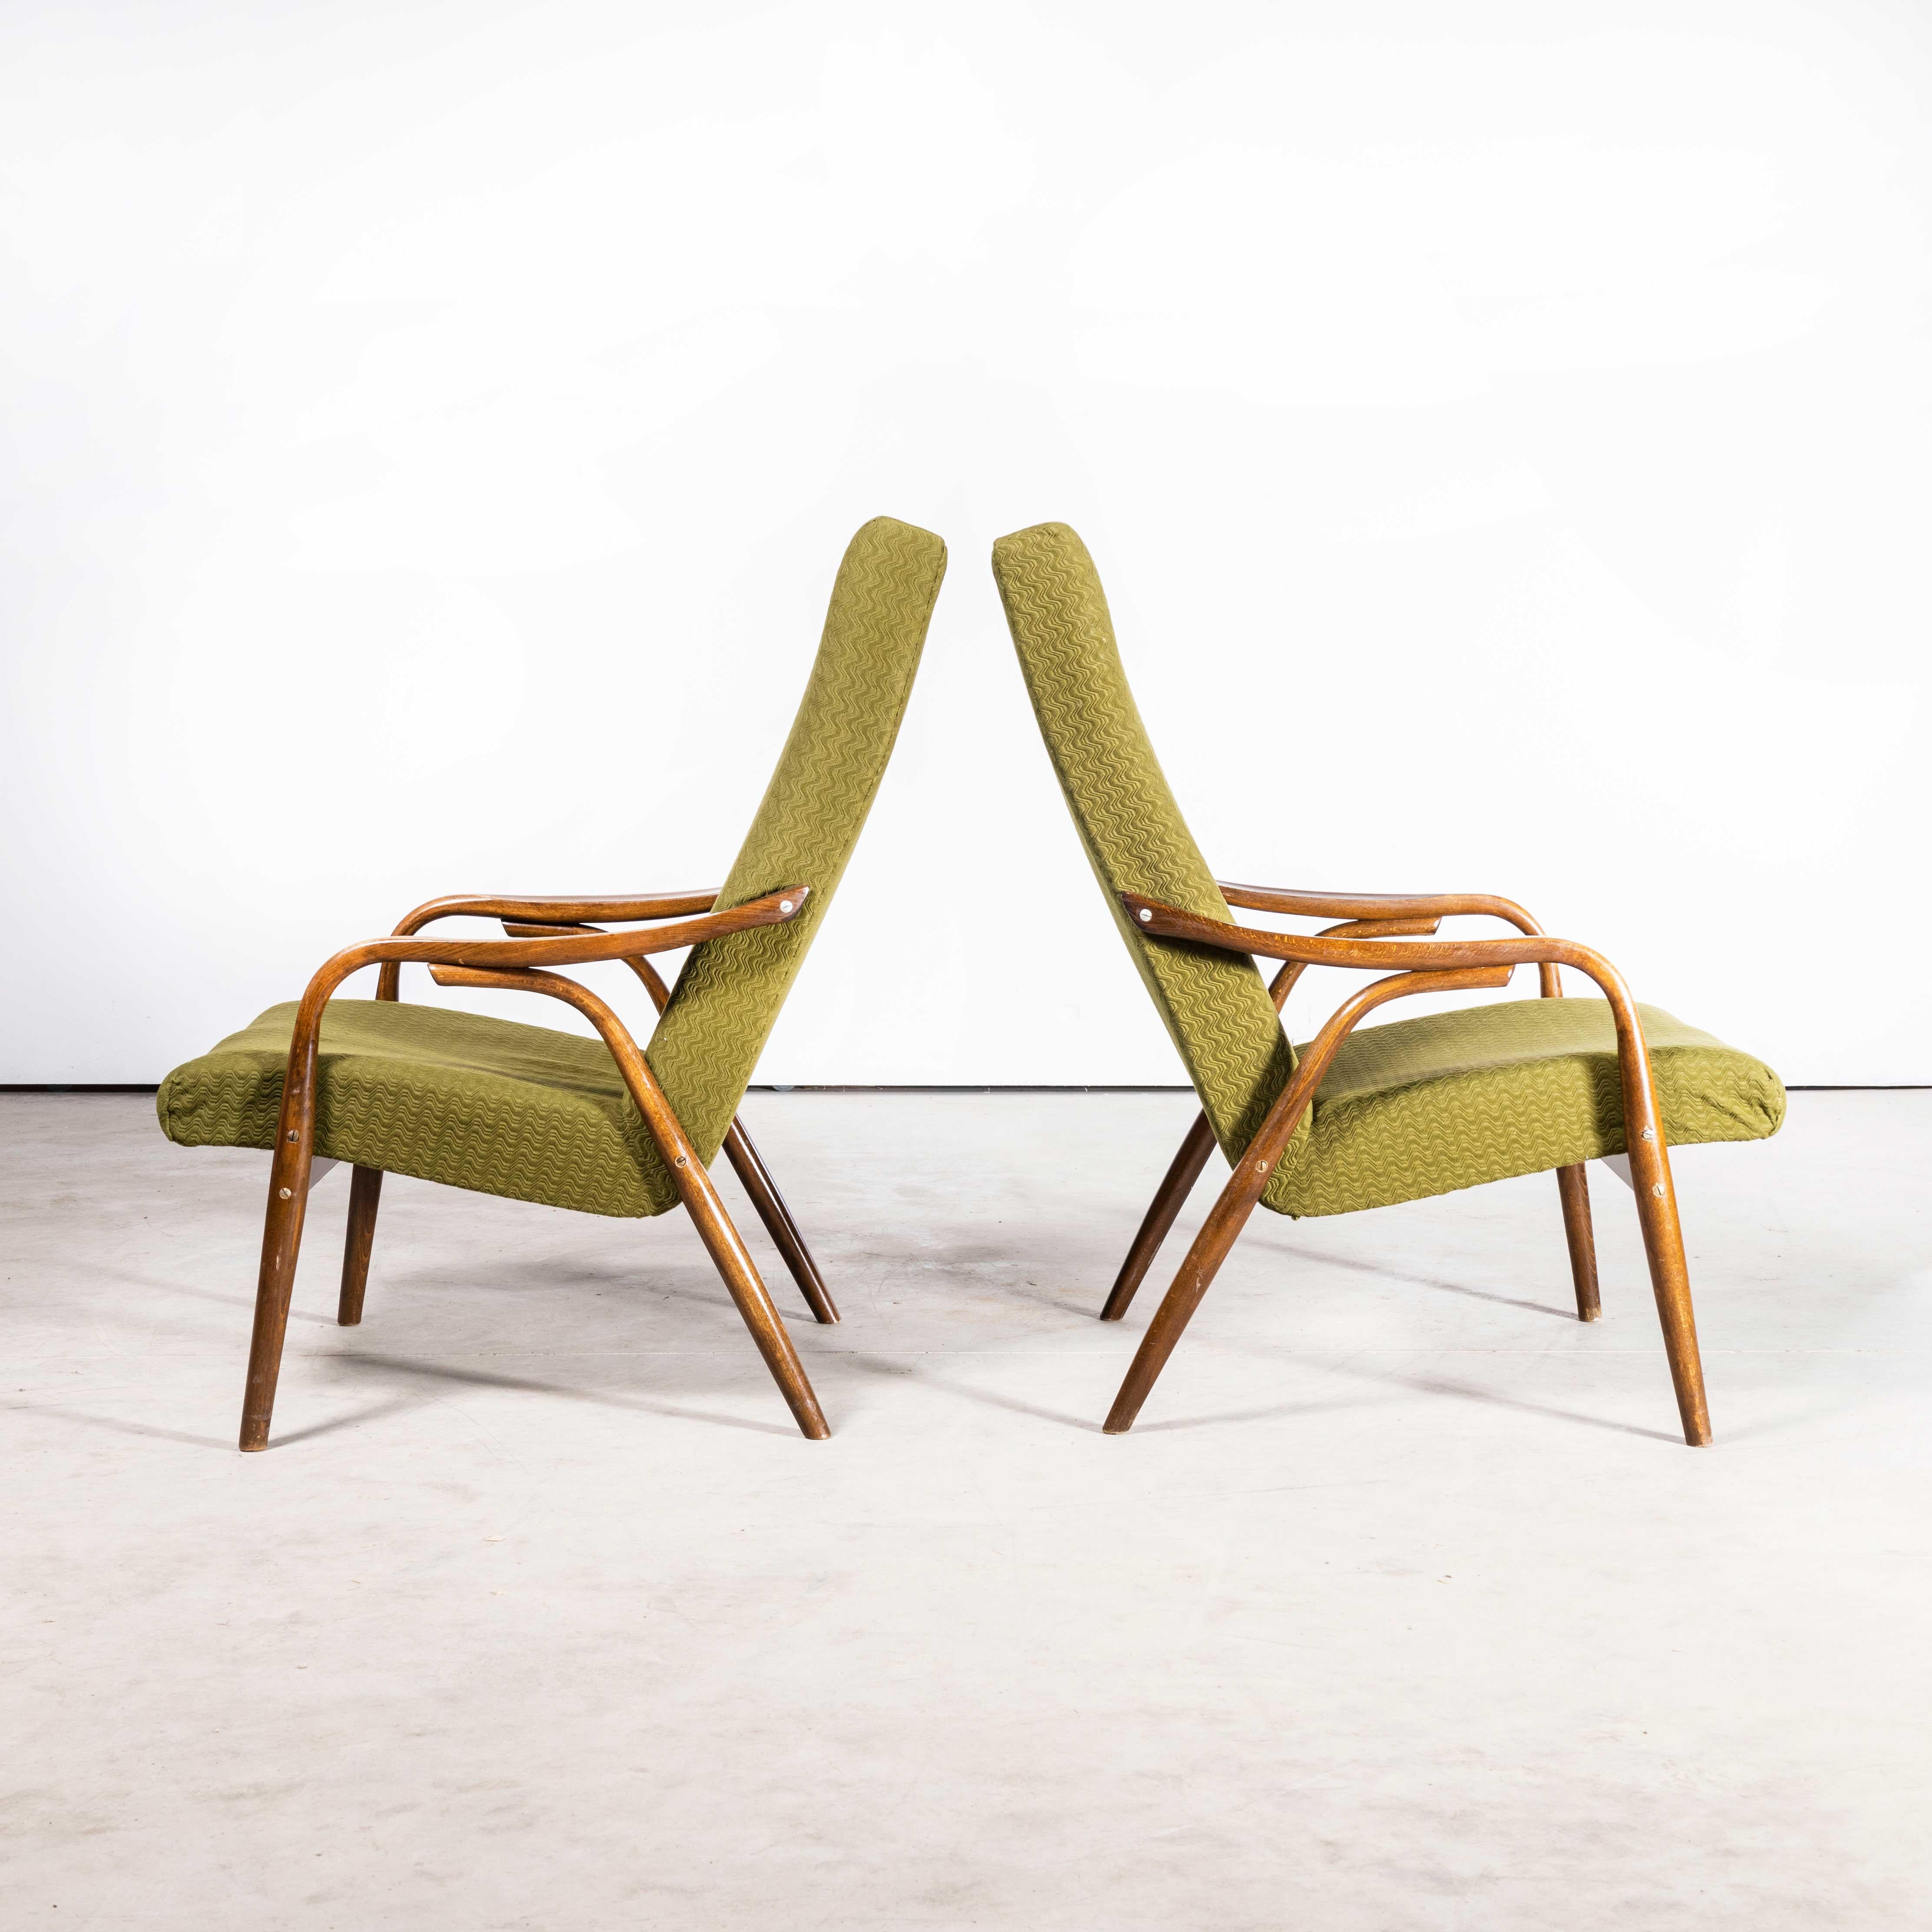 Upholstery 1950s Czech Midcentury Original Armchairs, Pair in Olive Green